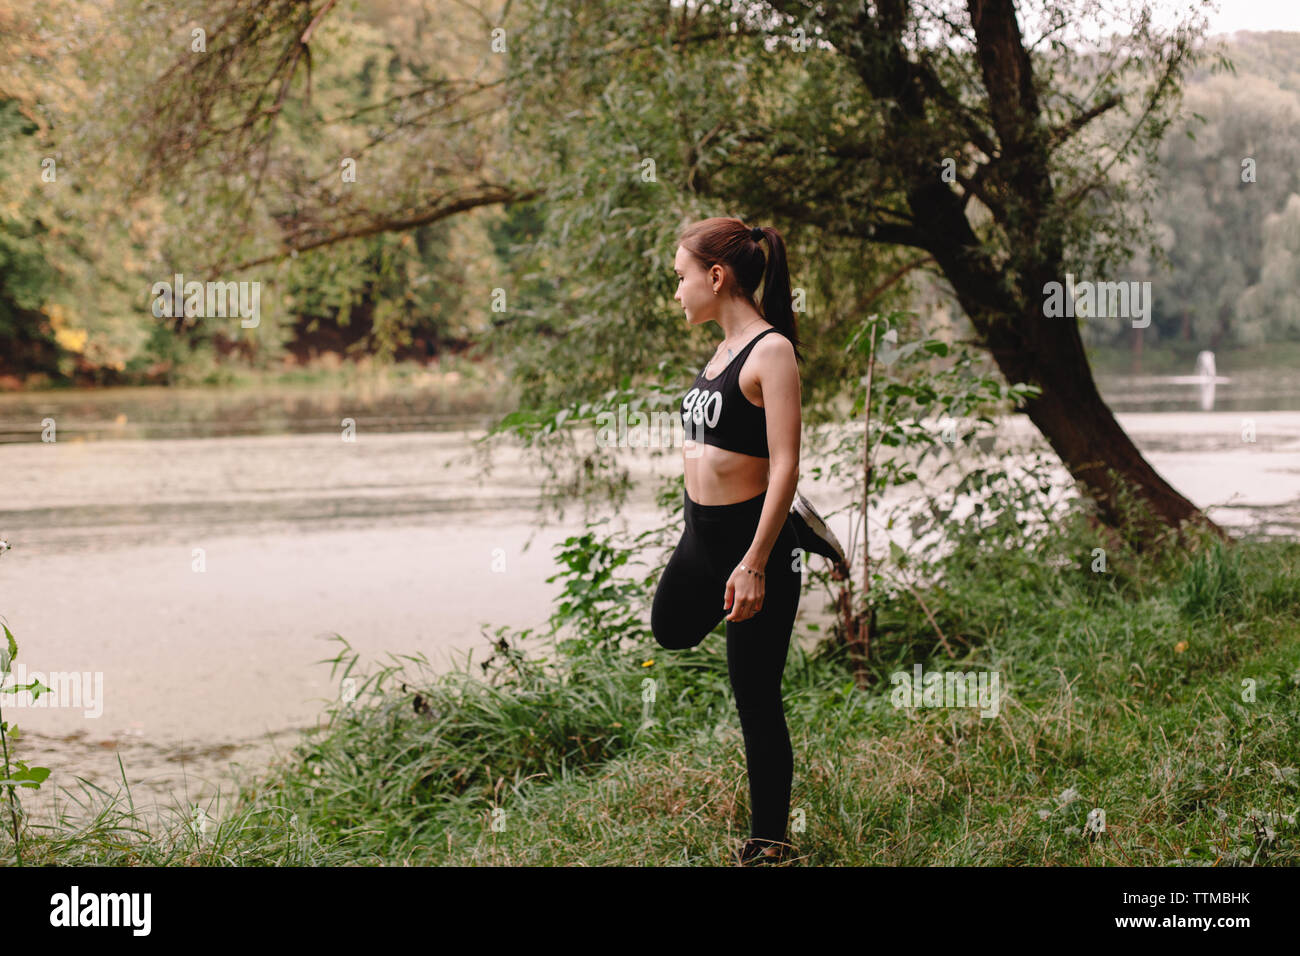 Female jogger stretching by lake in park Stock Photo